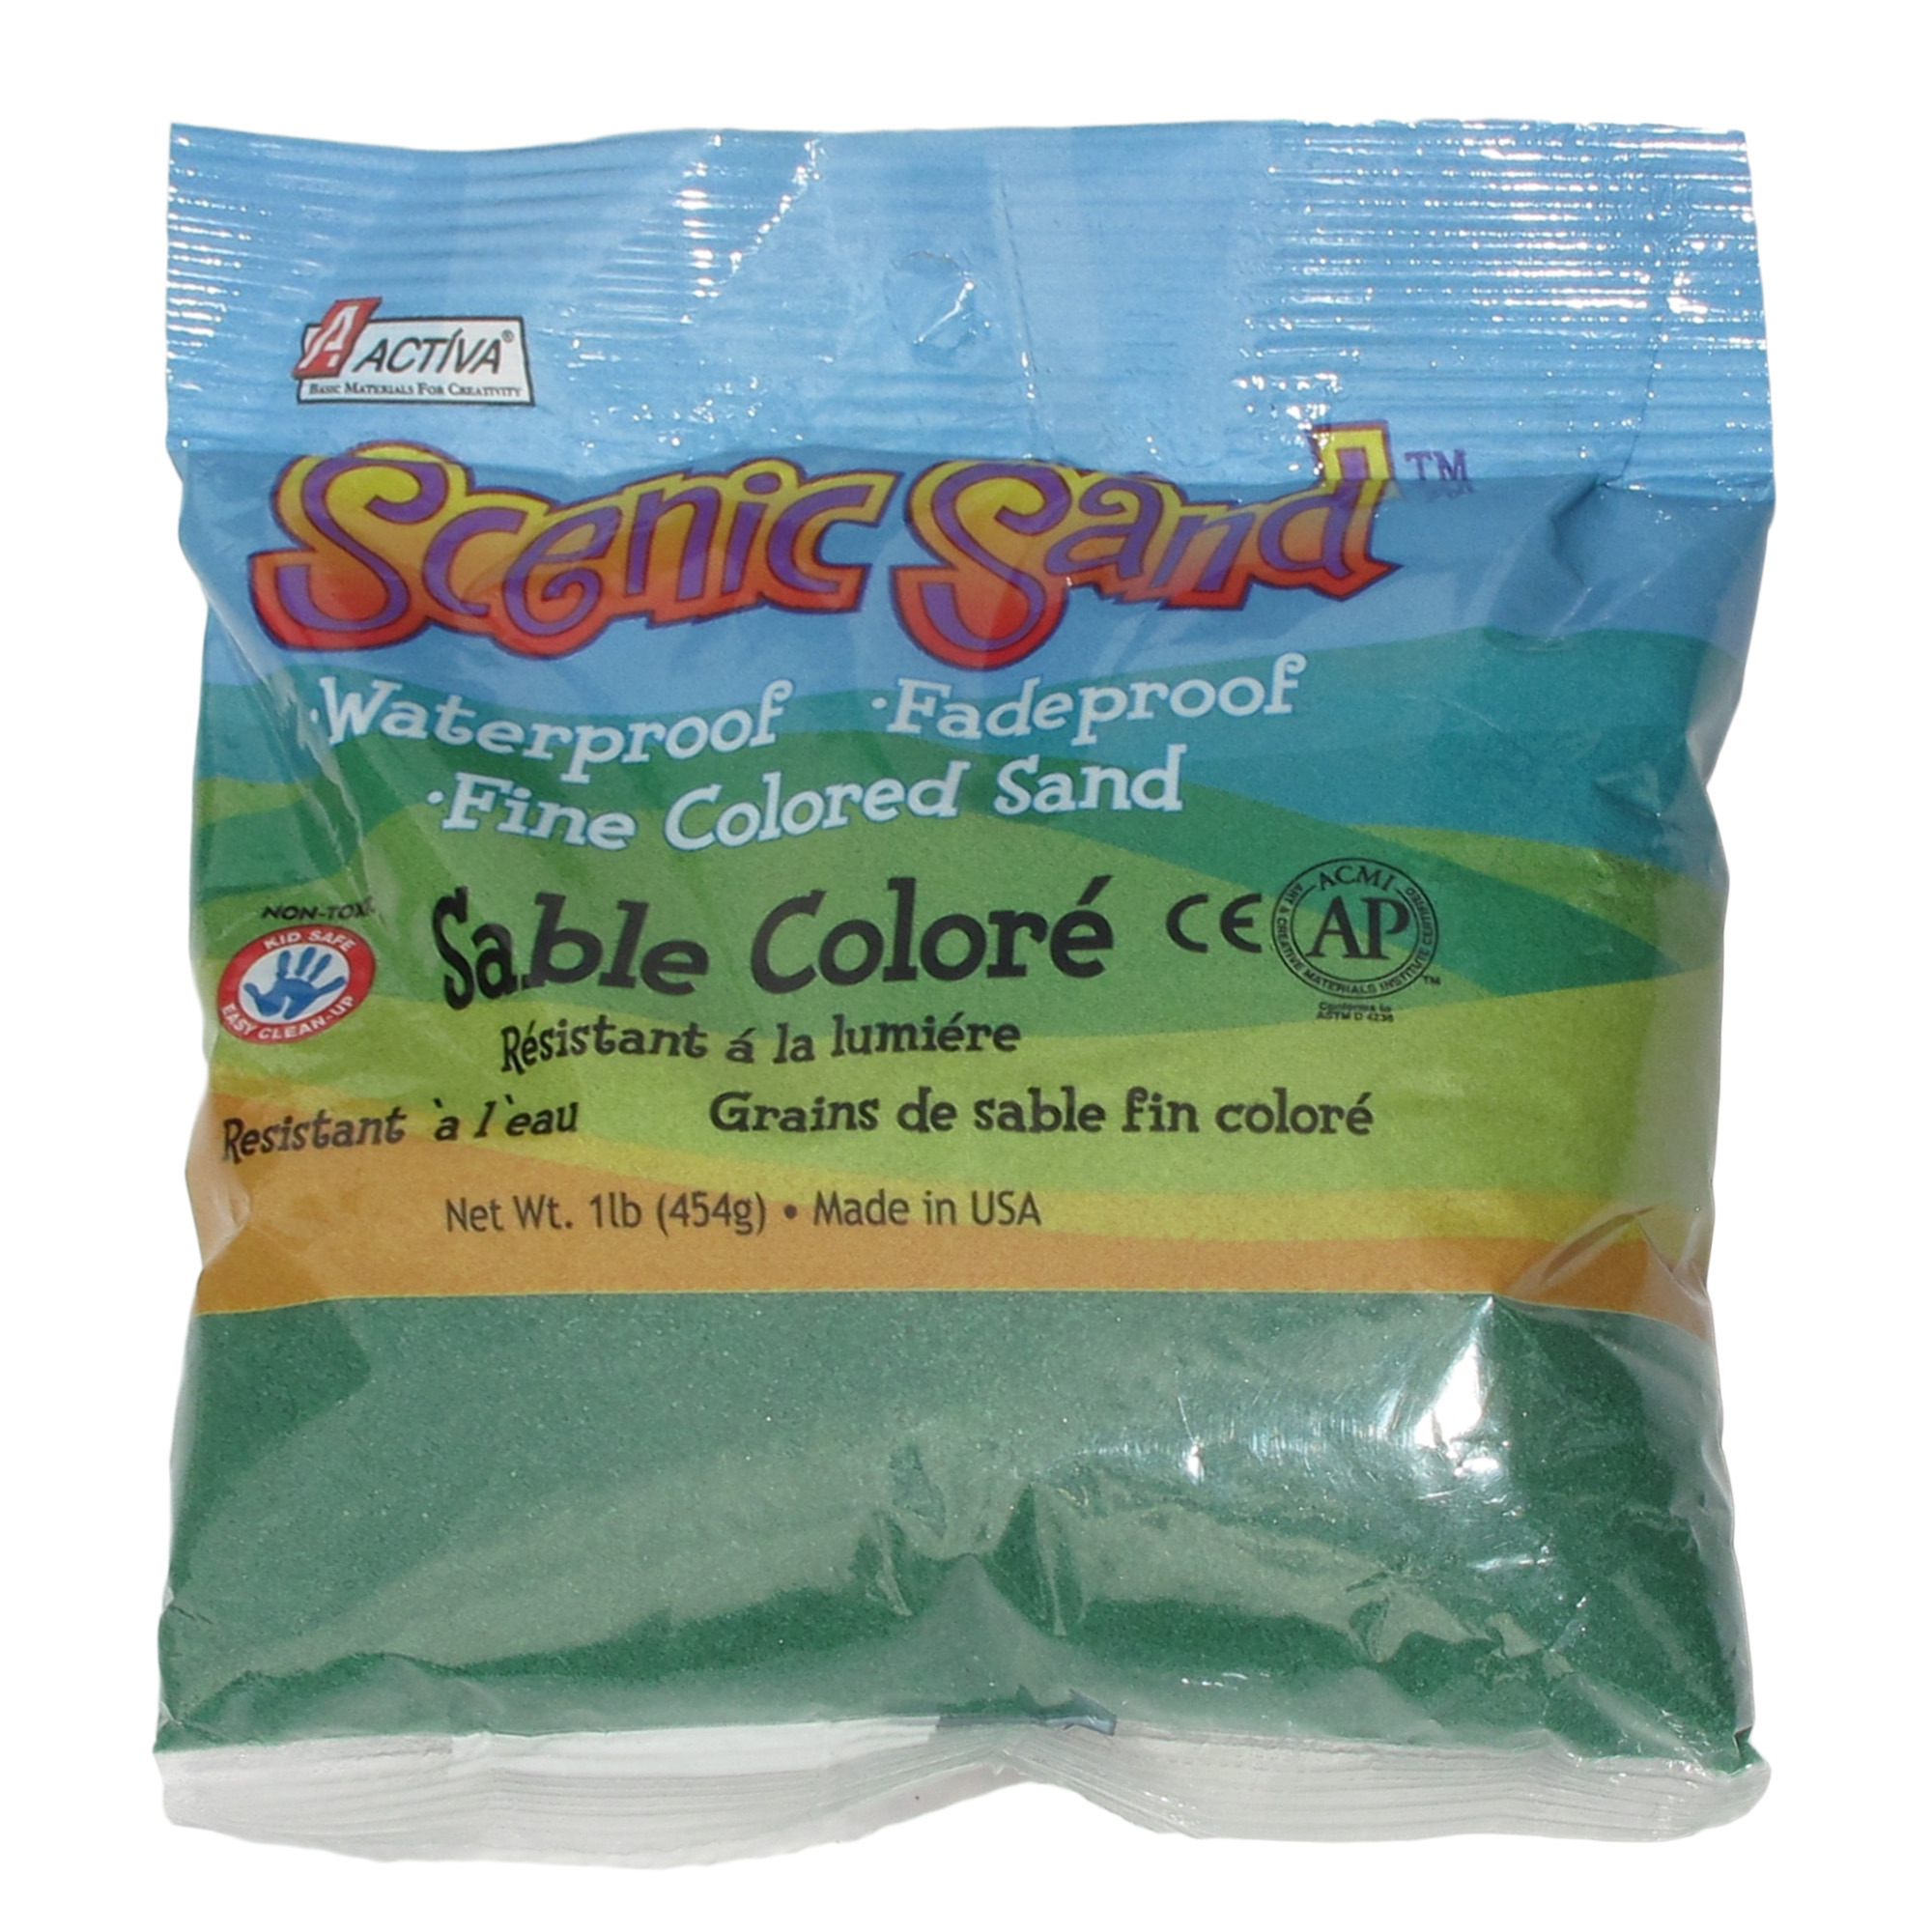 Activa Scenic Sand, 1 lb., Forest Green - image 1 of 2